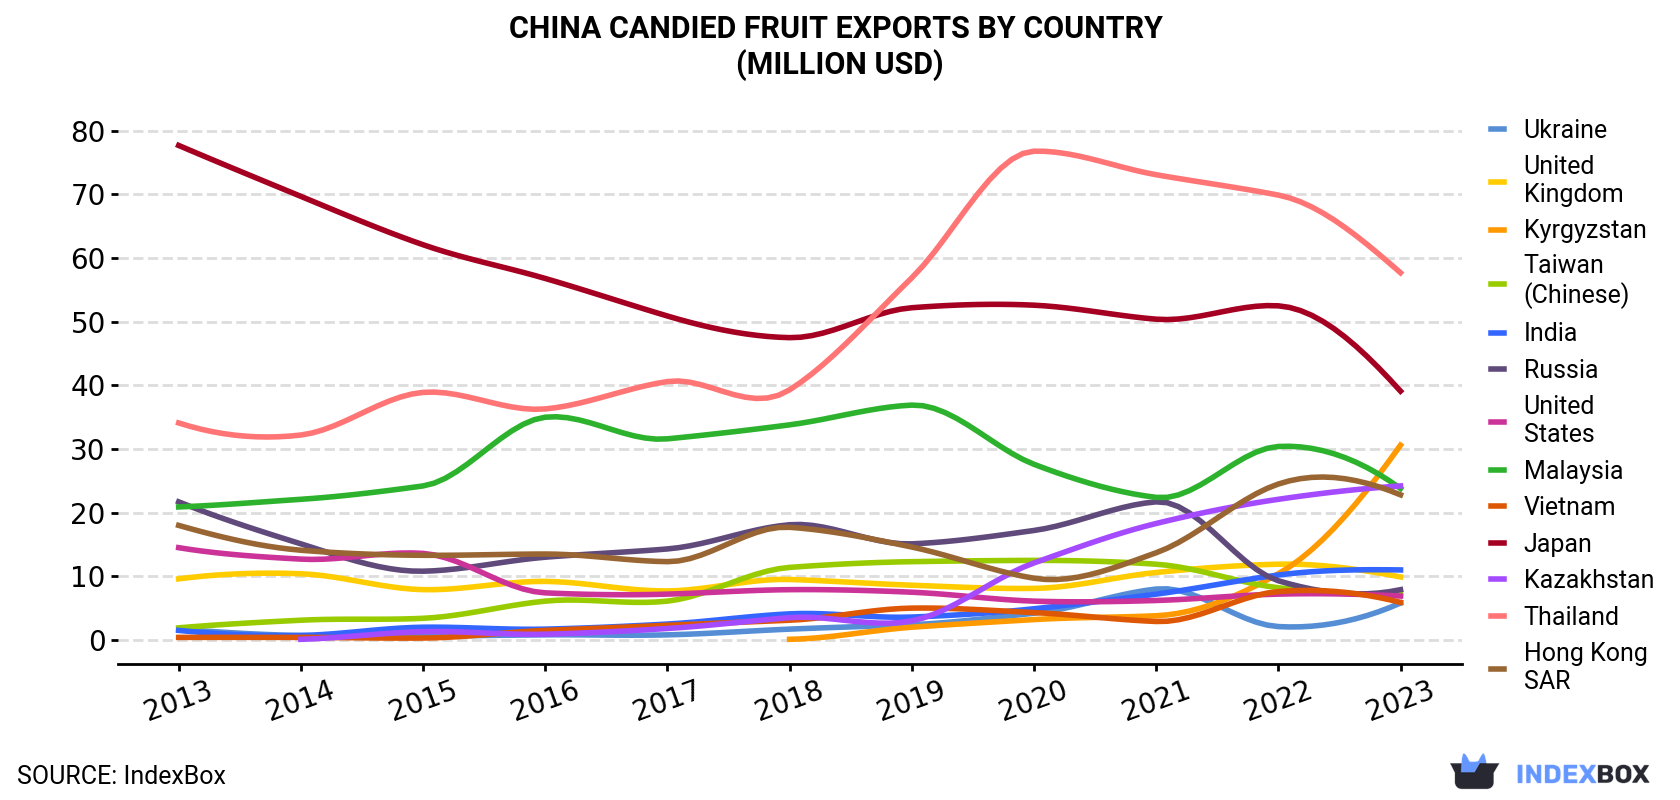 China Candied Fruit Exports By Country (Million USD)